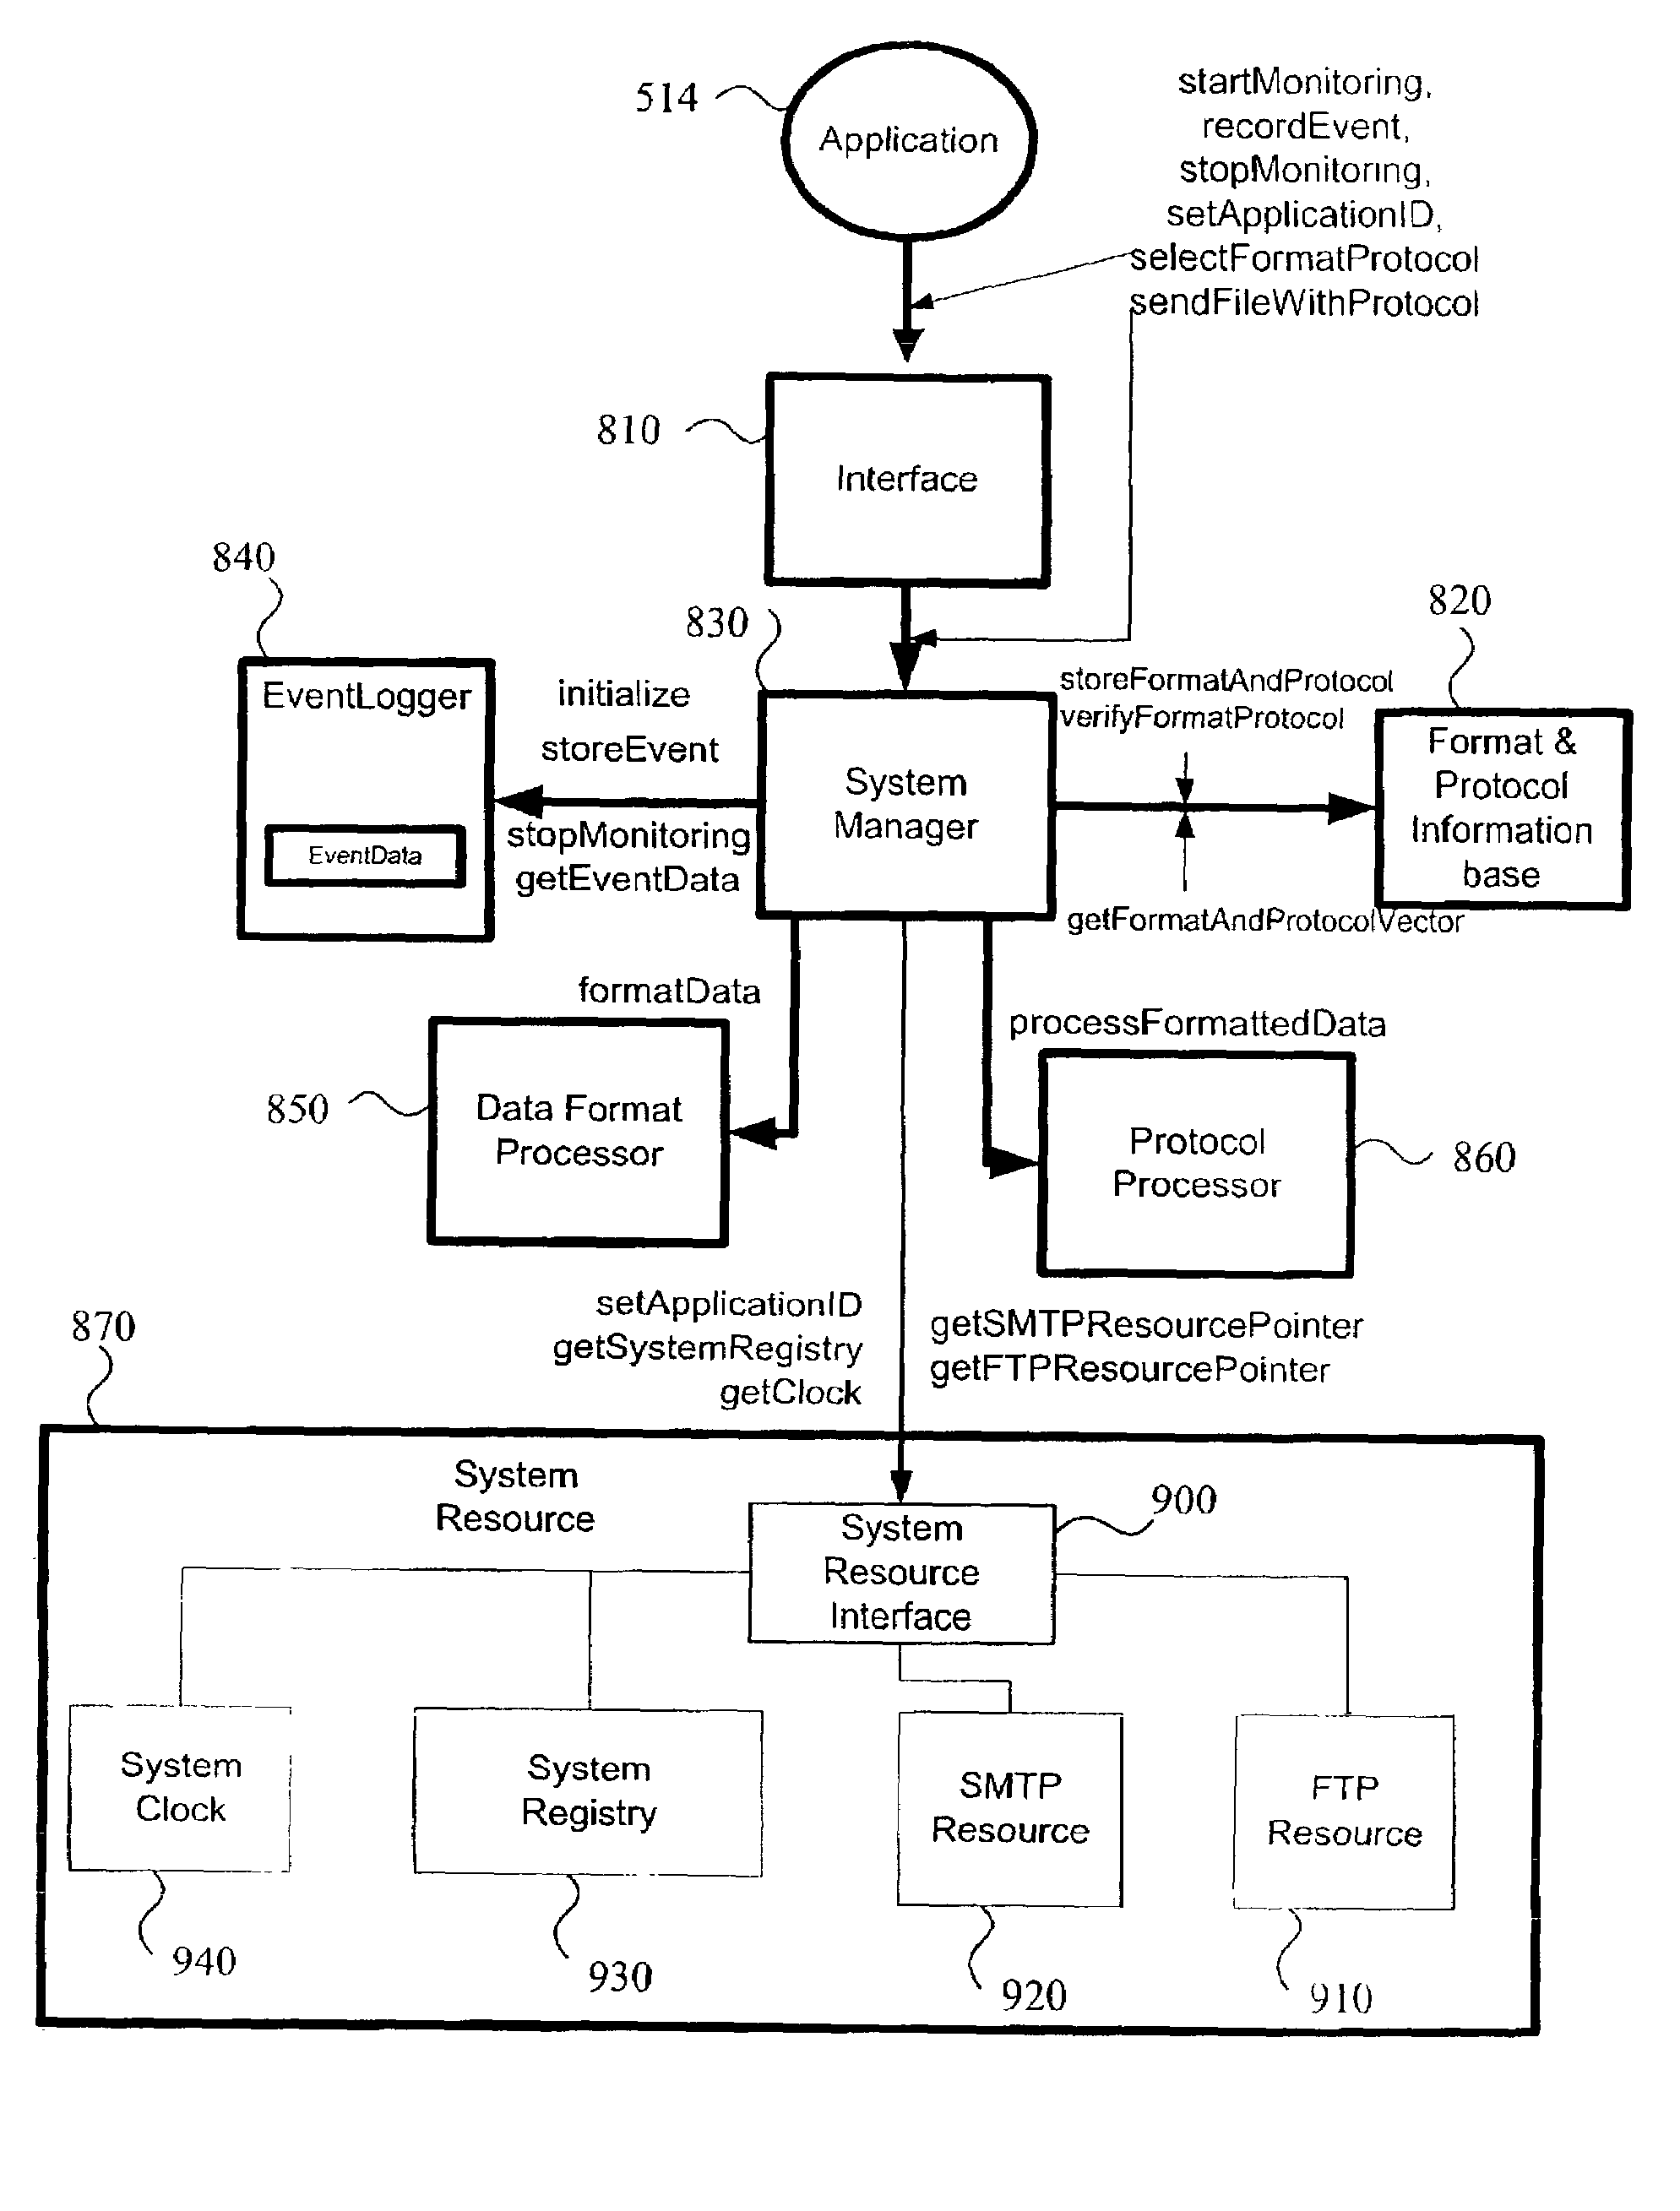 Method and system of remote diagnostic, control and information collection using a shared resource